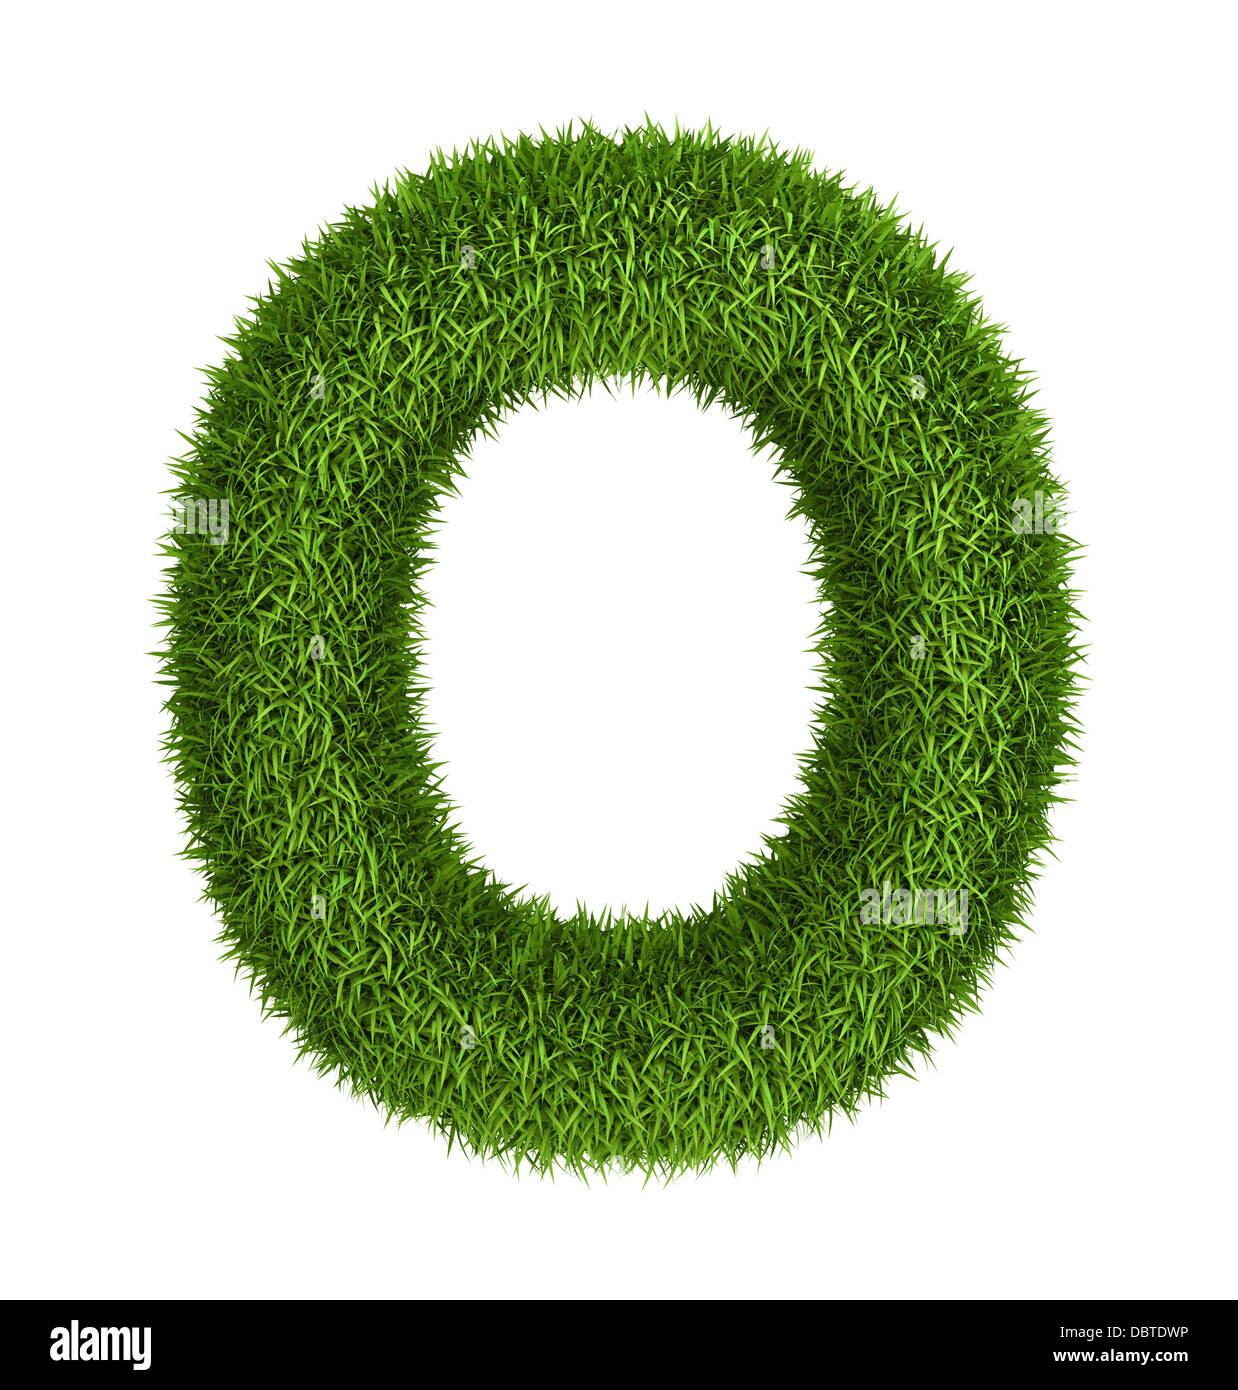 Natural grass letter o lowercase Stock Photo